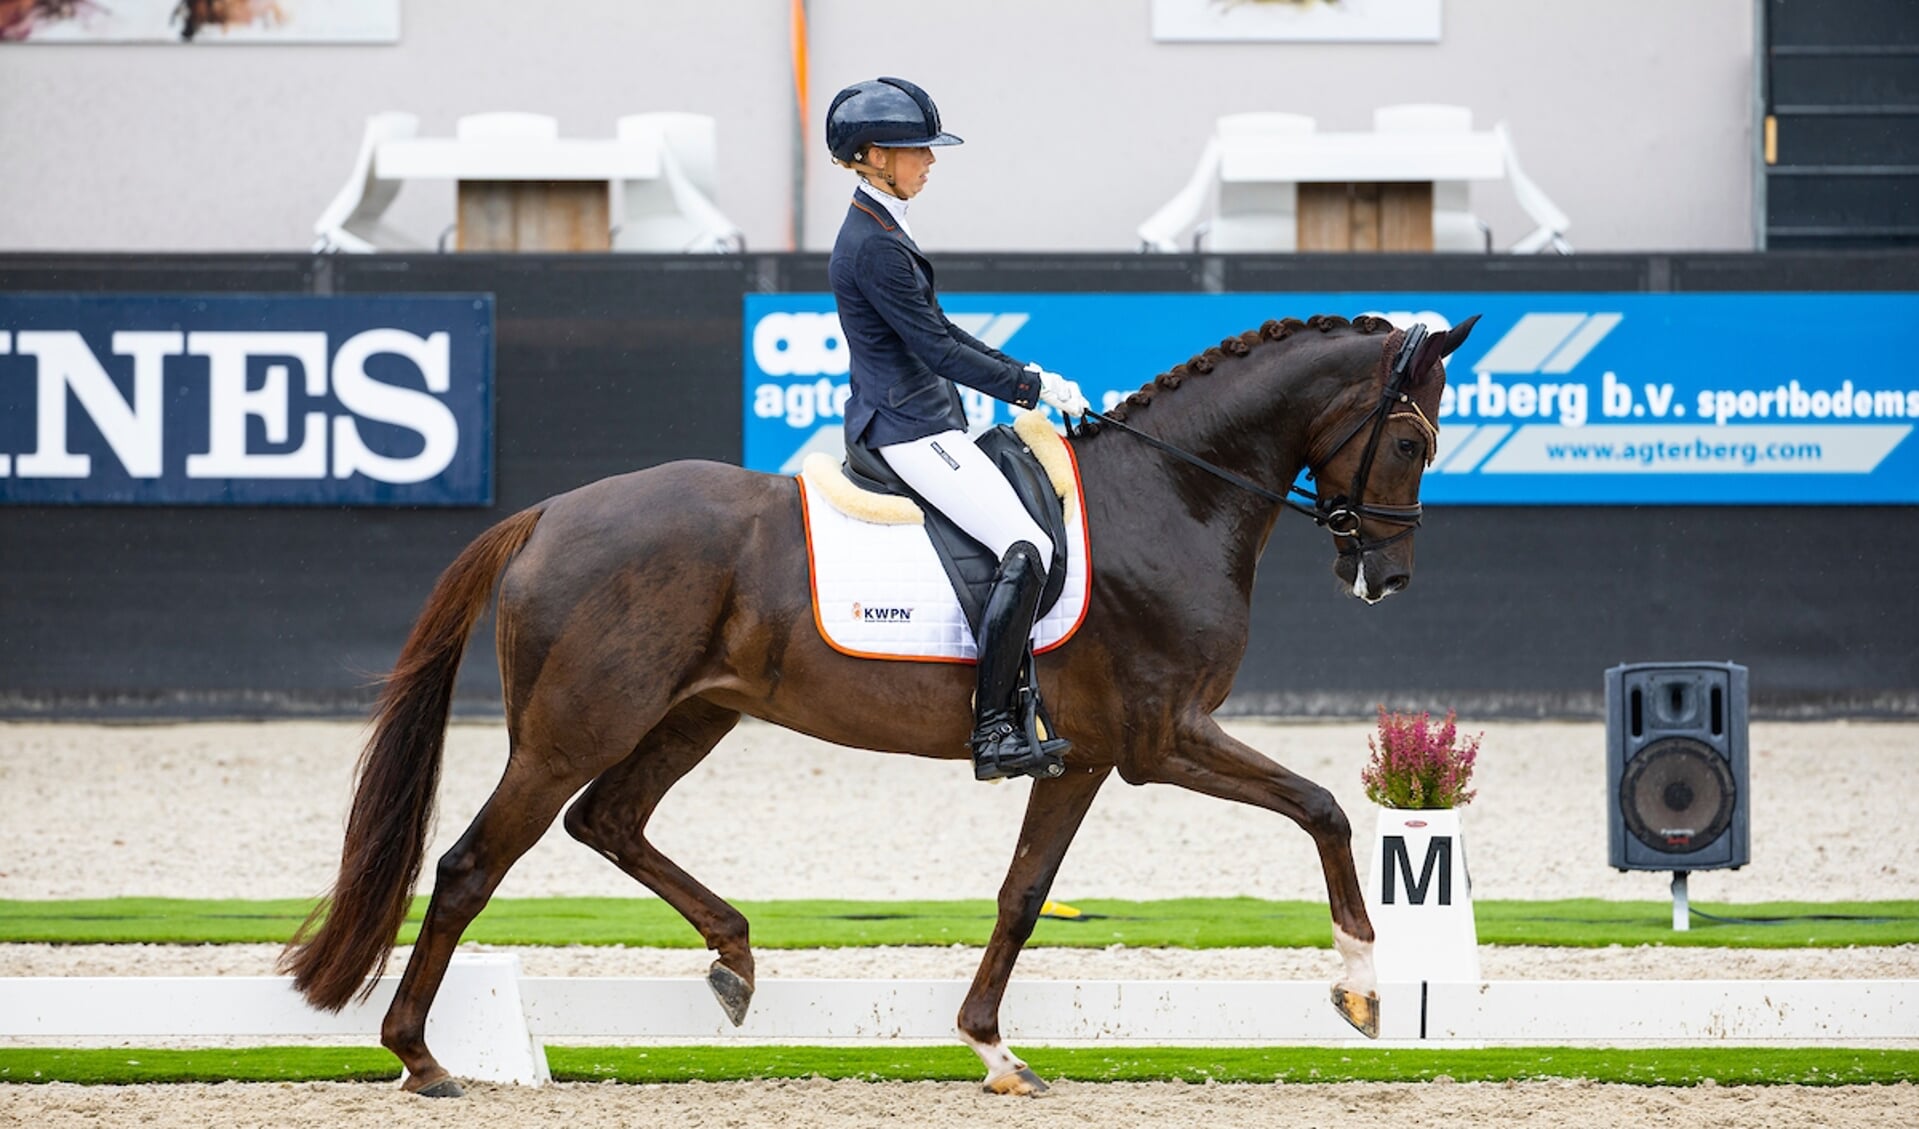 Kirsten Brouwer - My Precious
Longines FEI/WBFSH World Breeding Dressage Championships for Young Horses 2022
© DigiShots